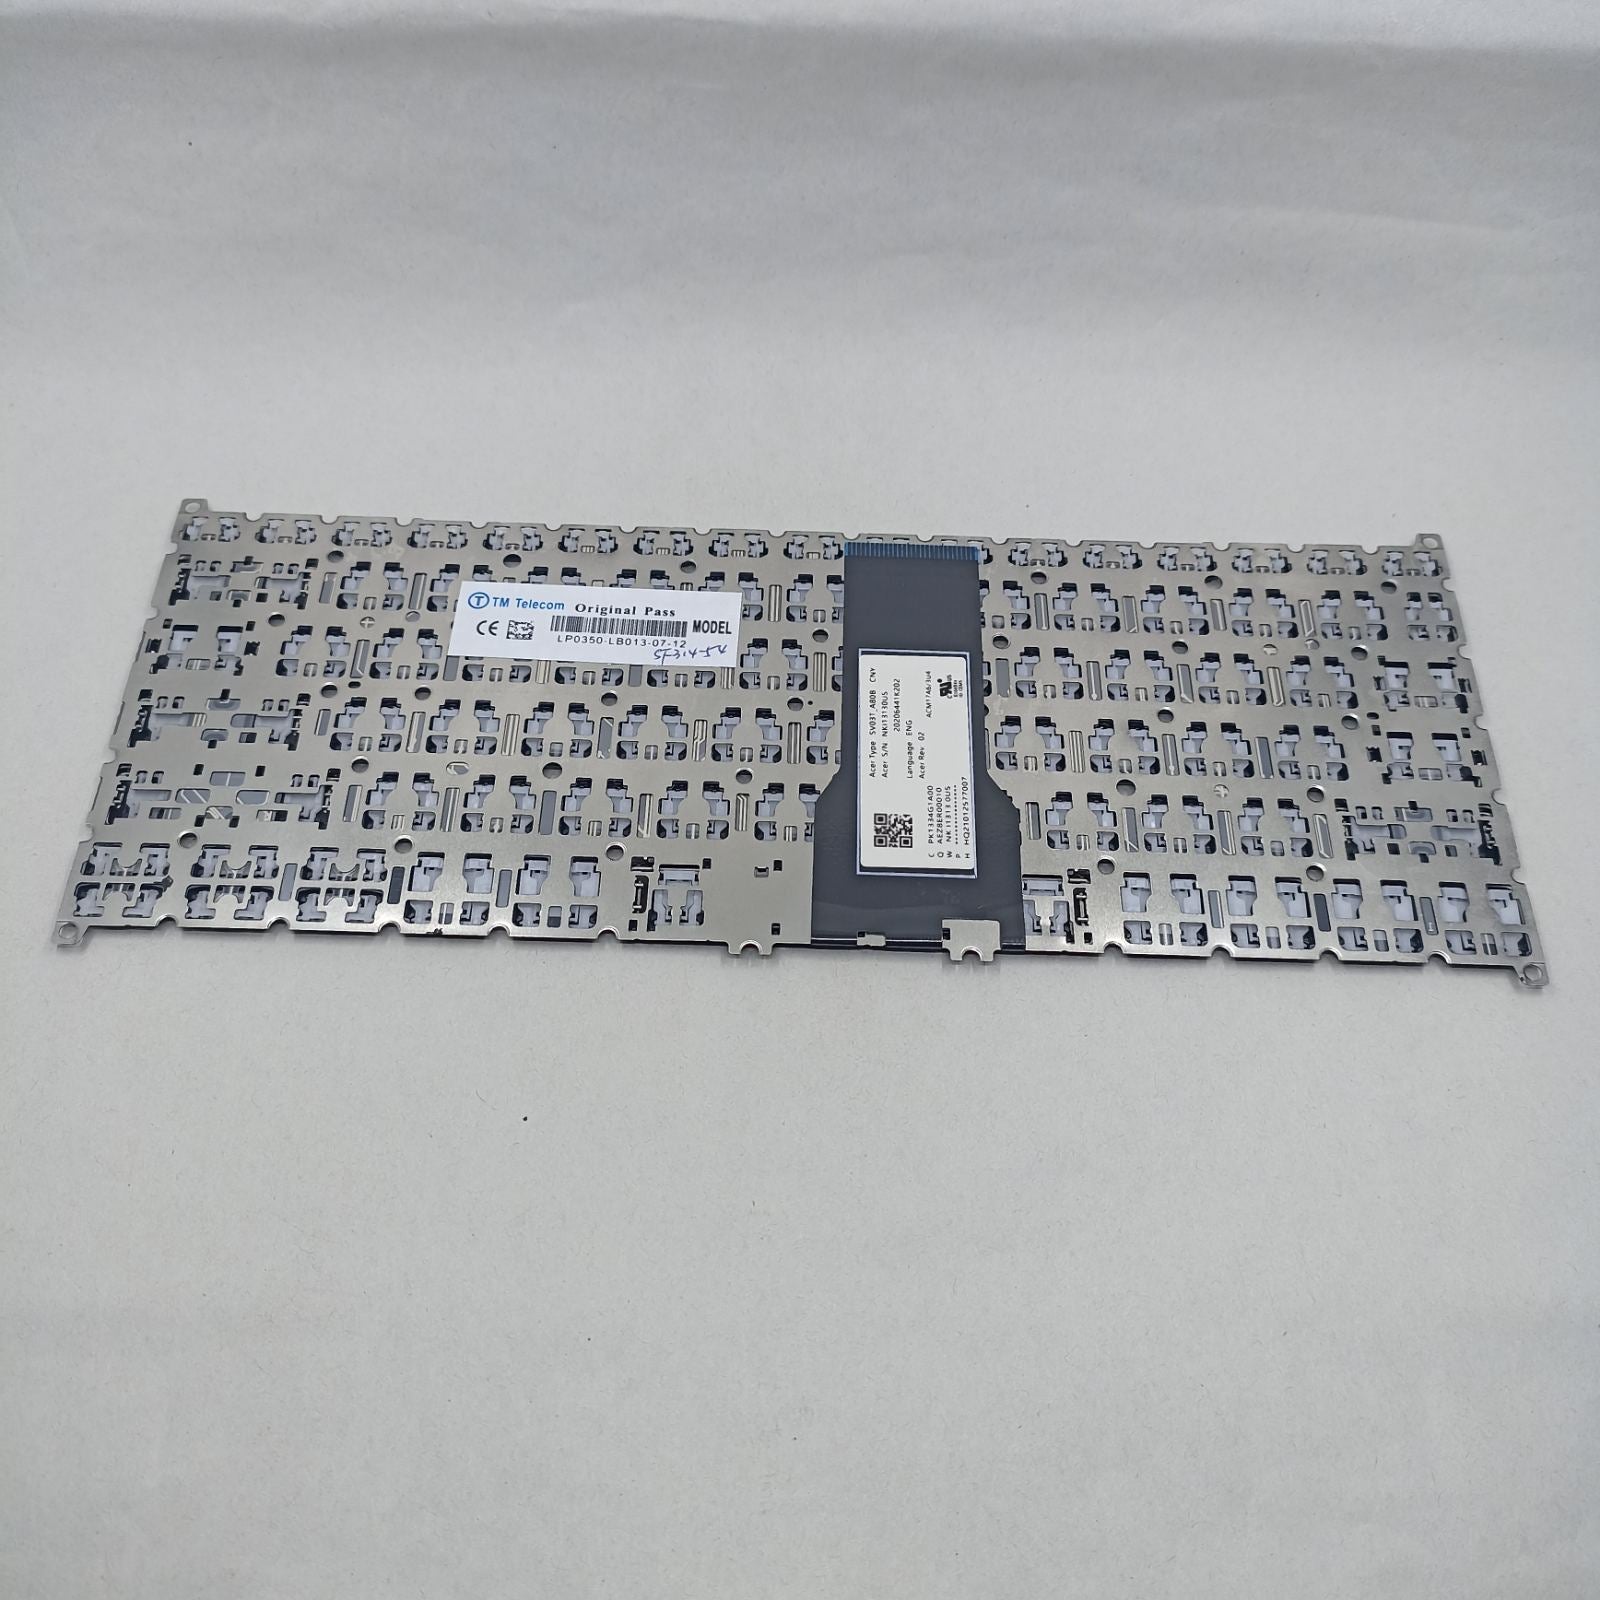 Replacement Keyboard Keys for Acer A314-22 A1